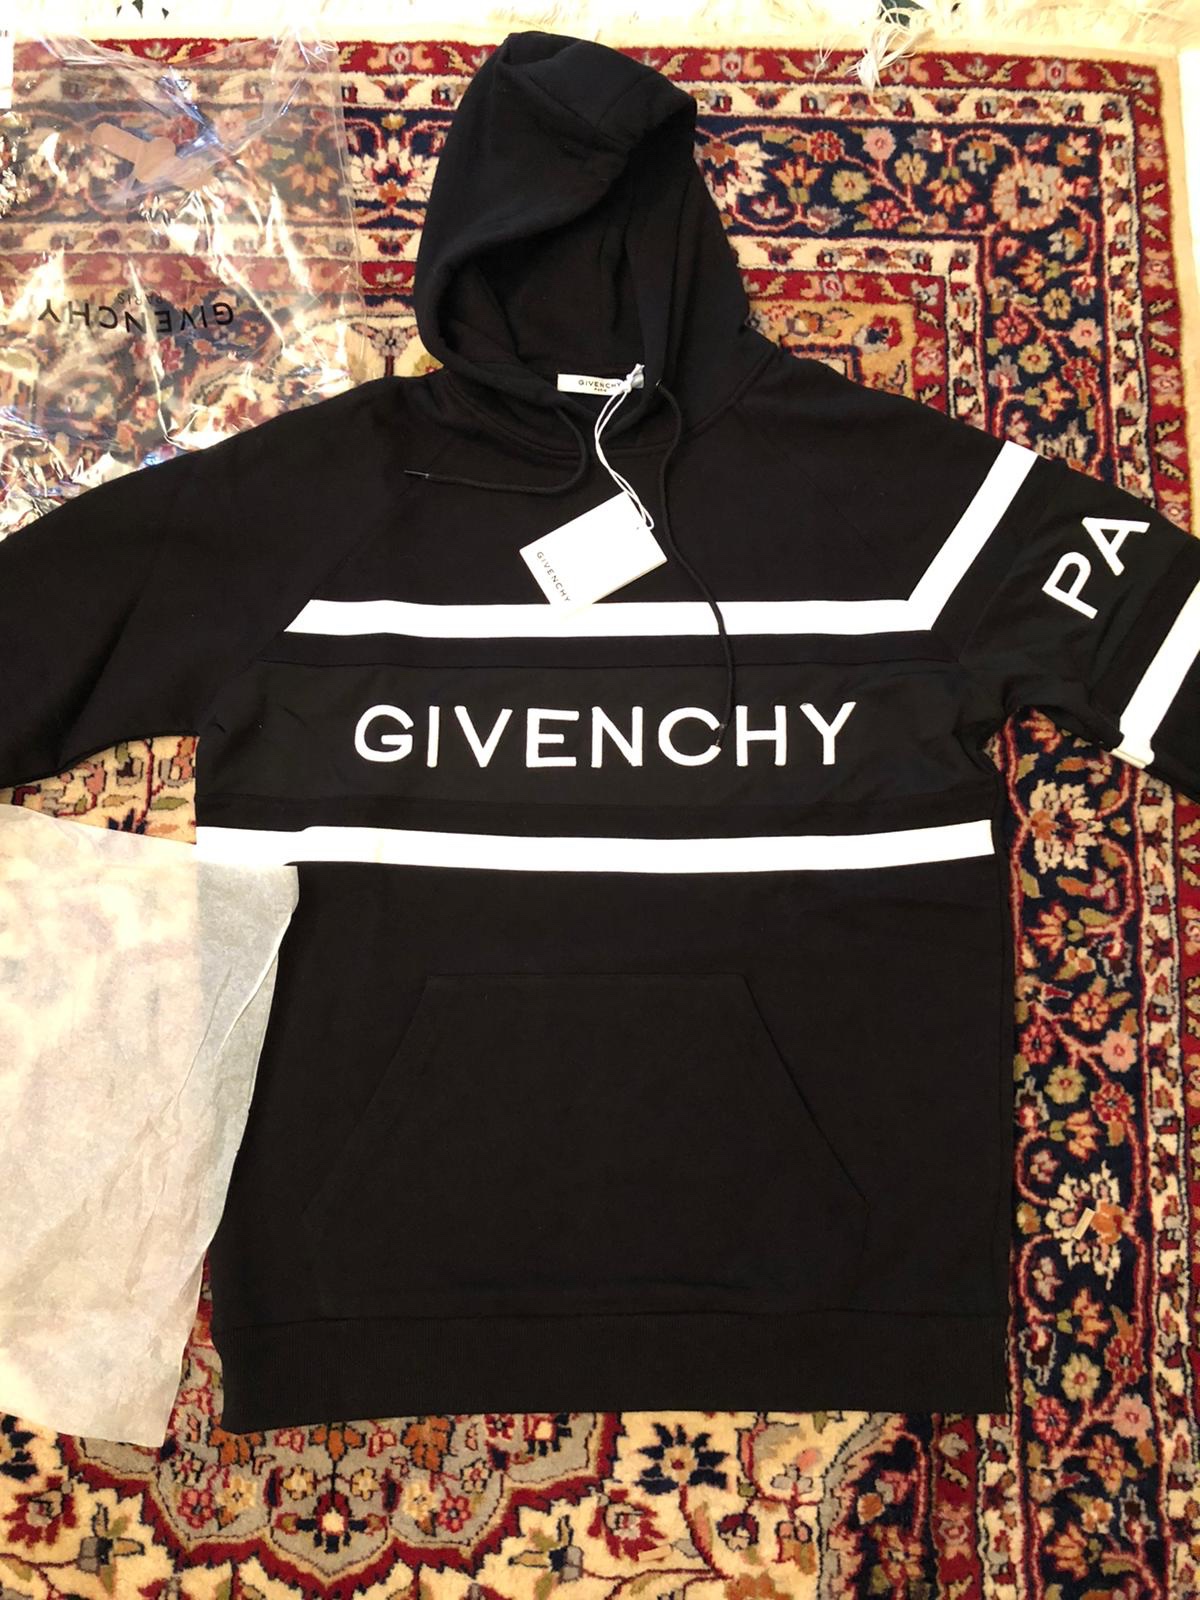 Hoodie GIVENCHY UNDER RETAIL - Meetapp